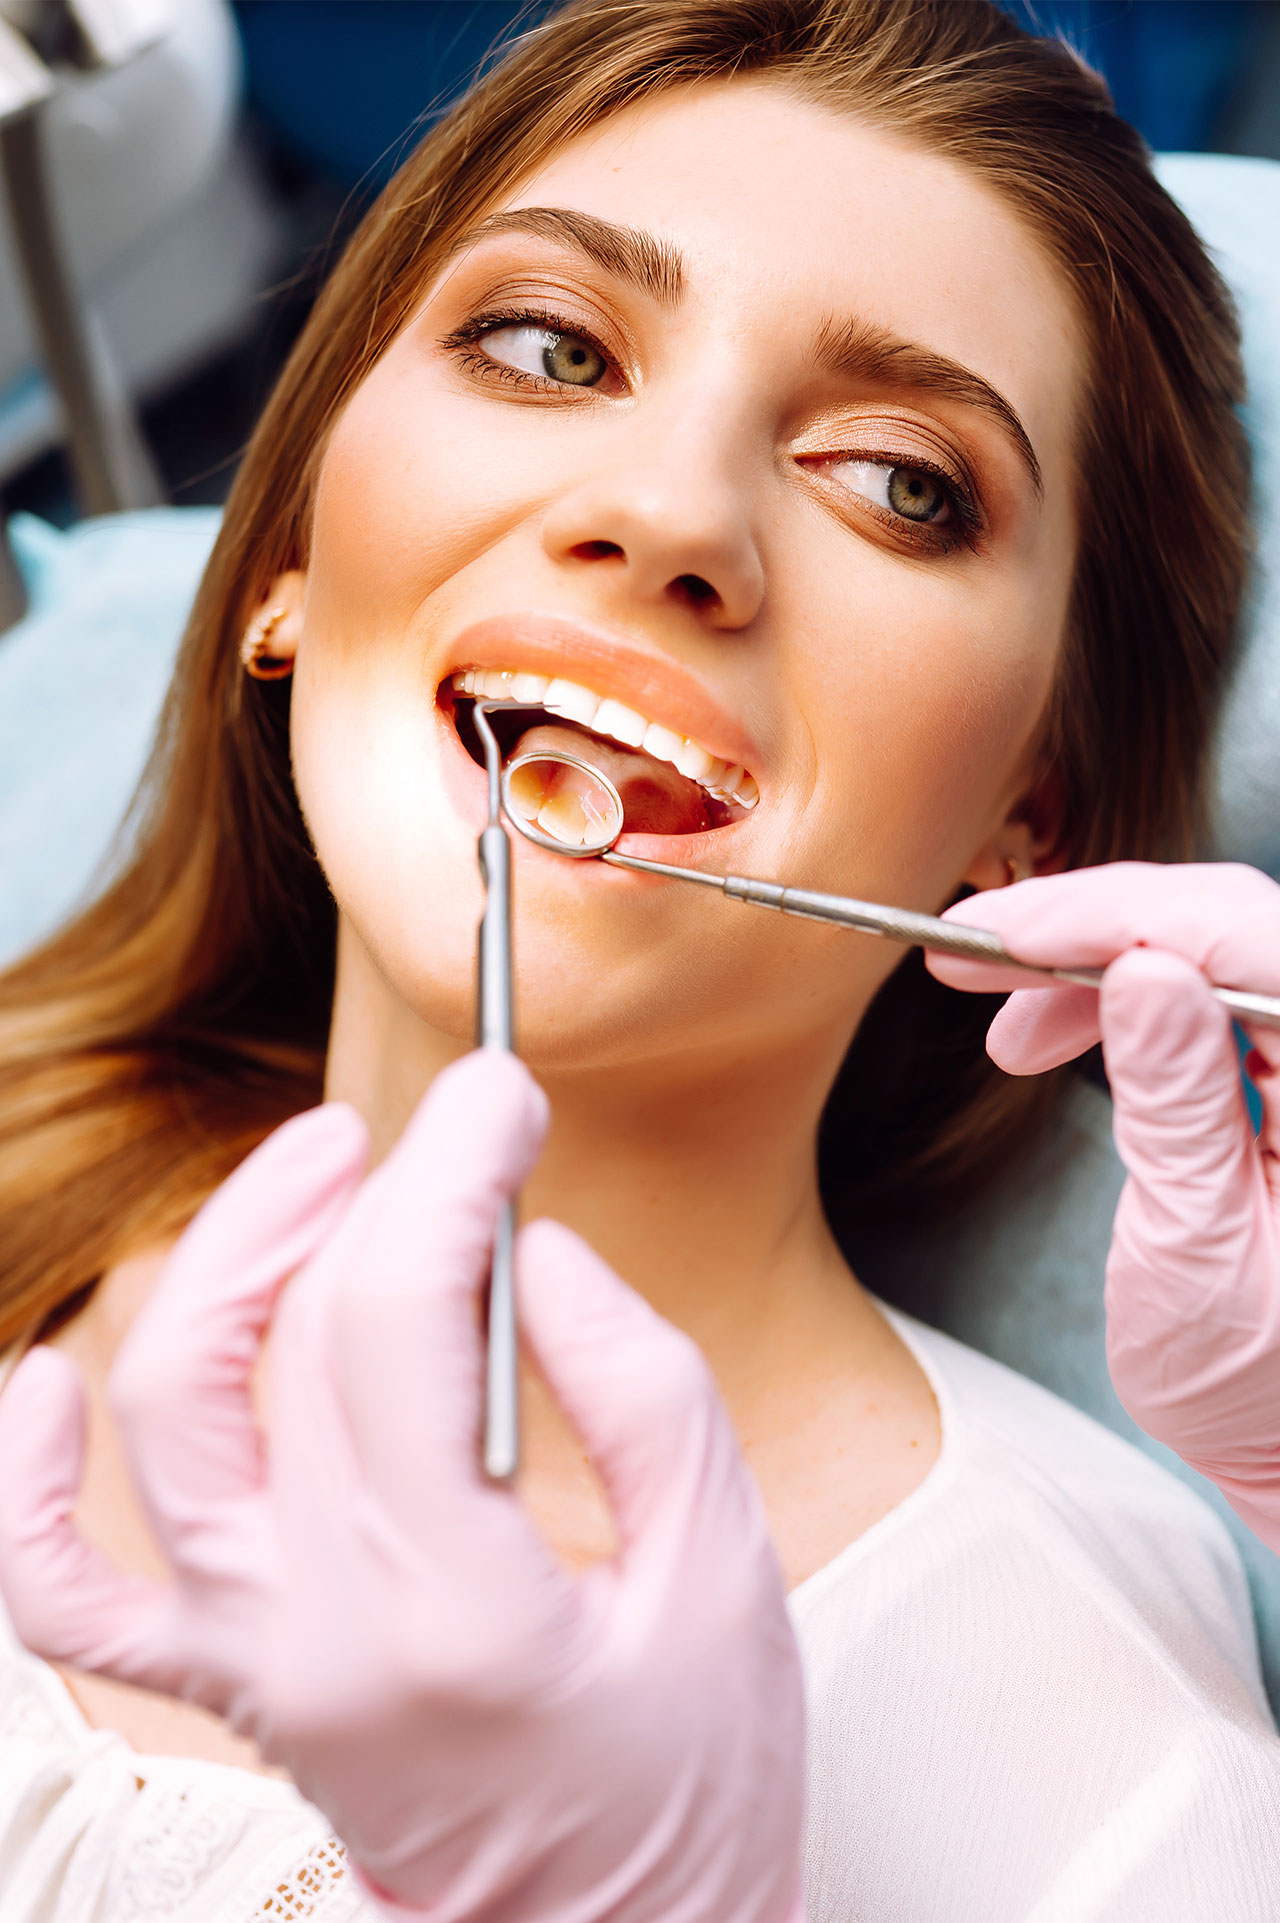 Glenn Smile Center's dental excellence ensures perfect smiles, with grateful adults displaying relief and contentment.